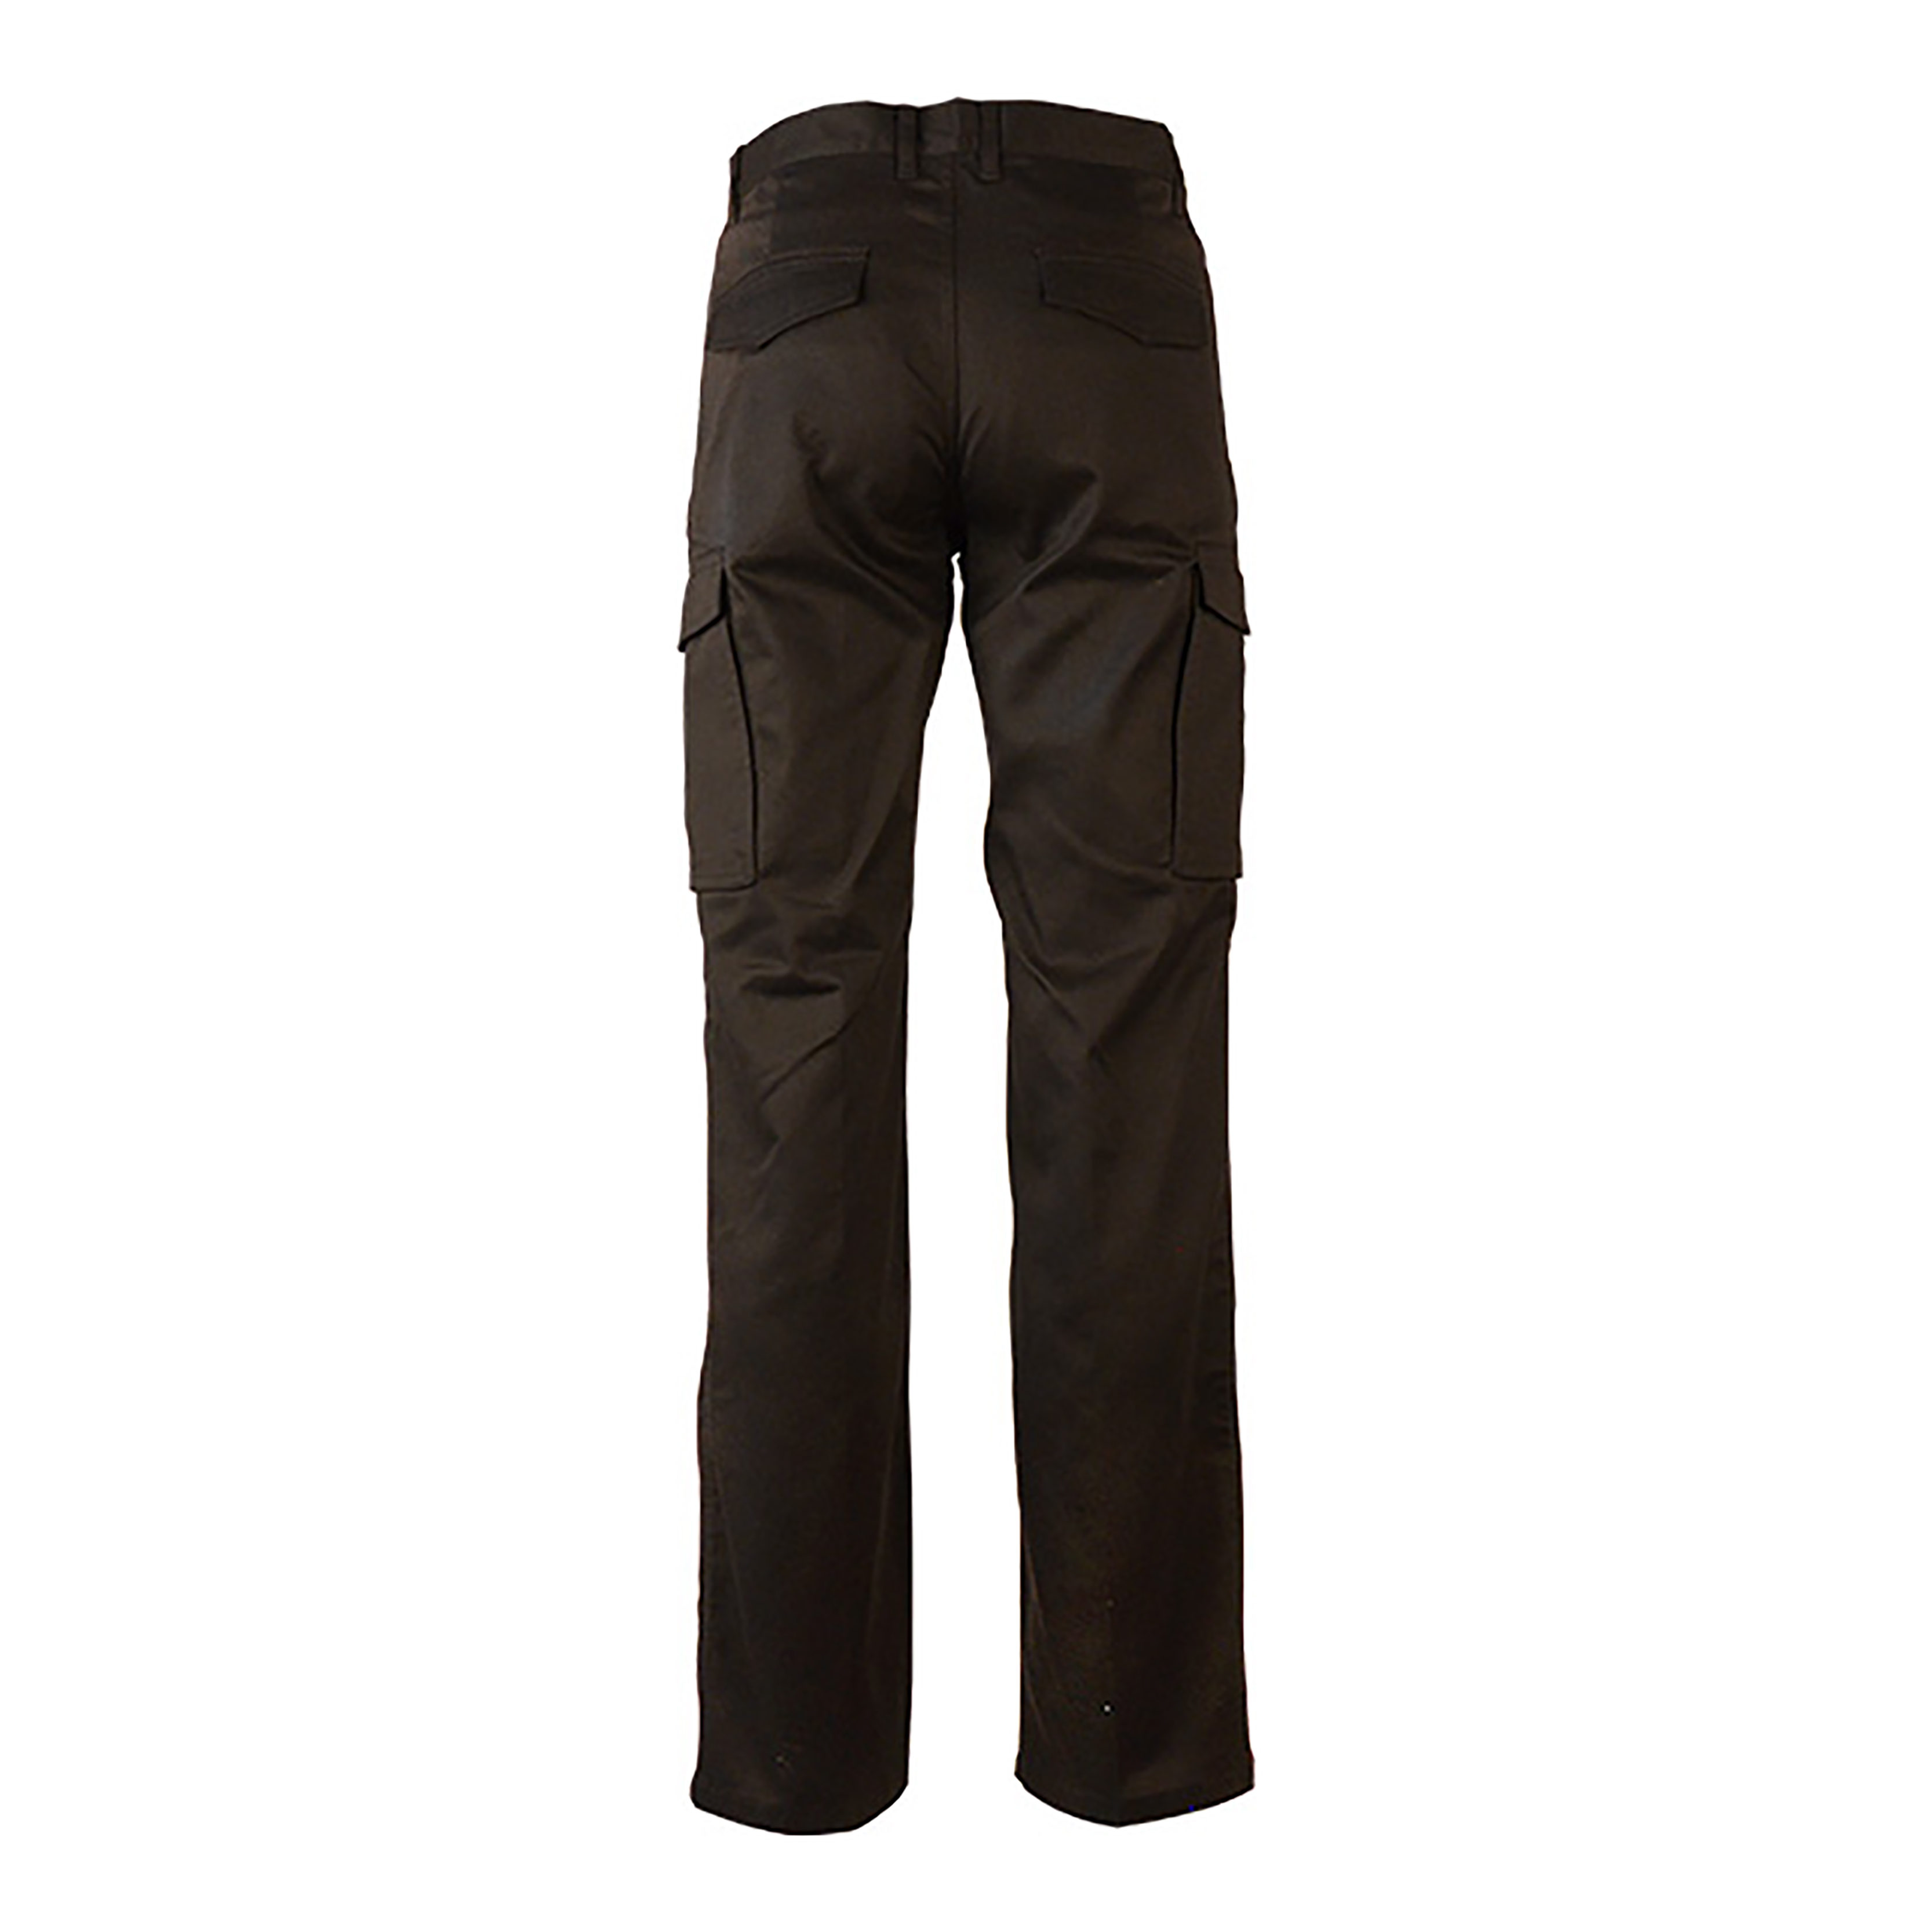 Cargo Pants Wholesale Suppliers In Bangalore Airport